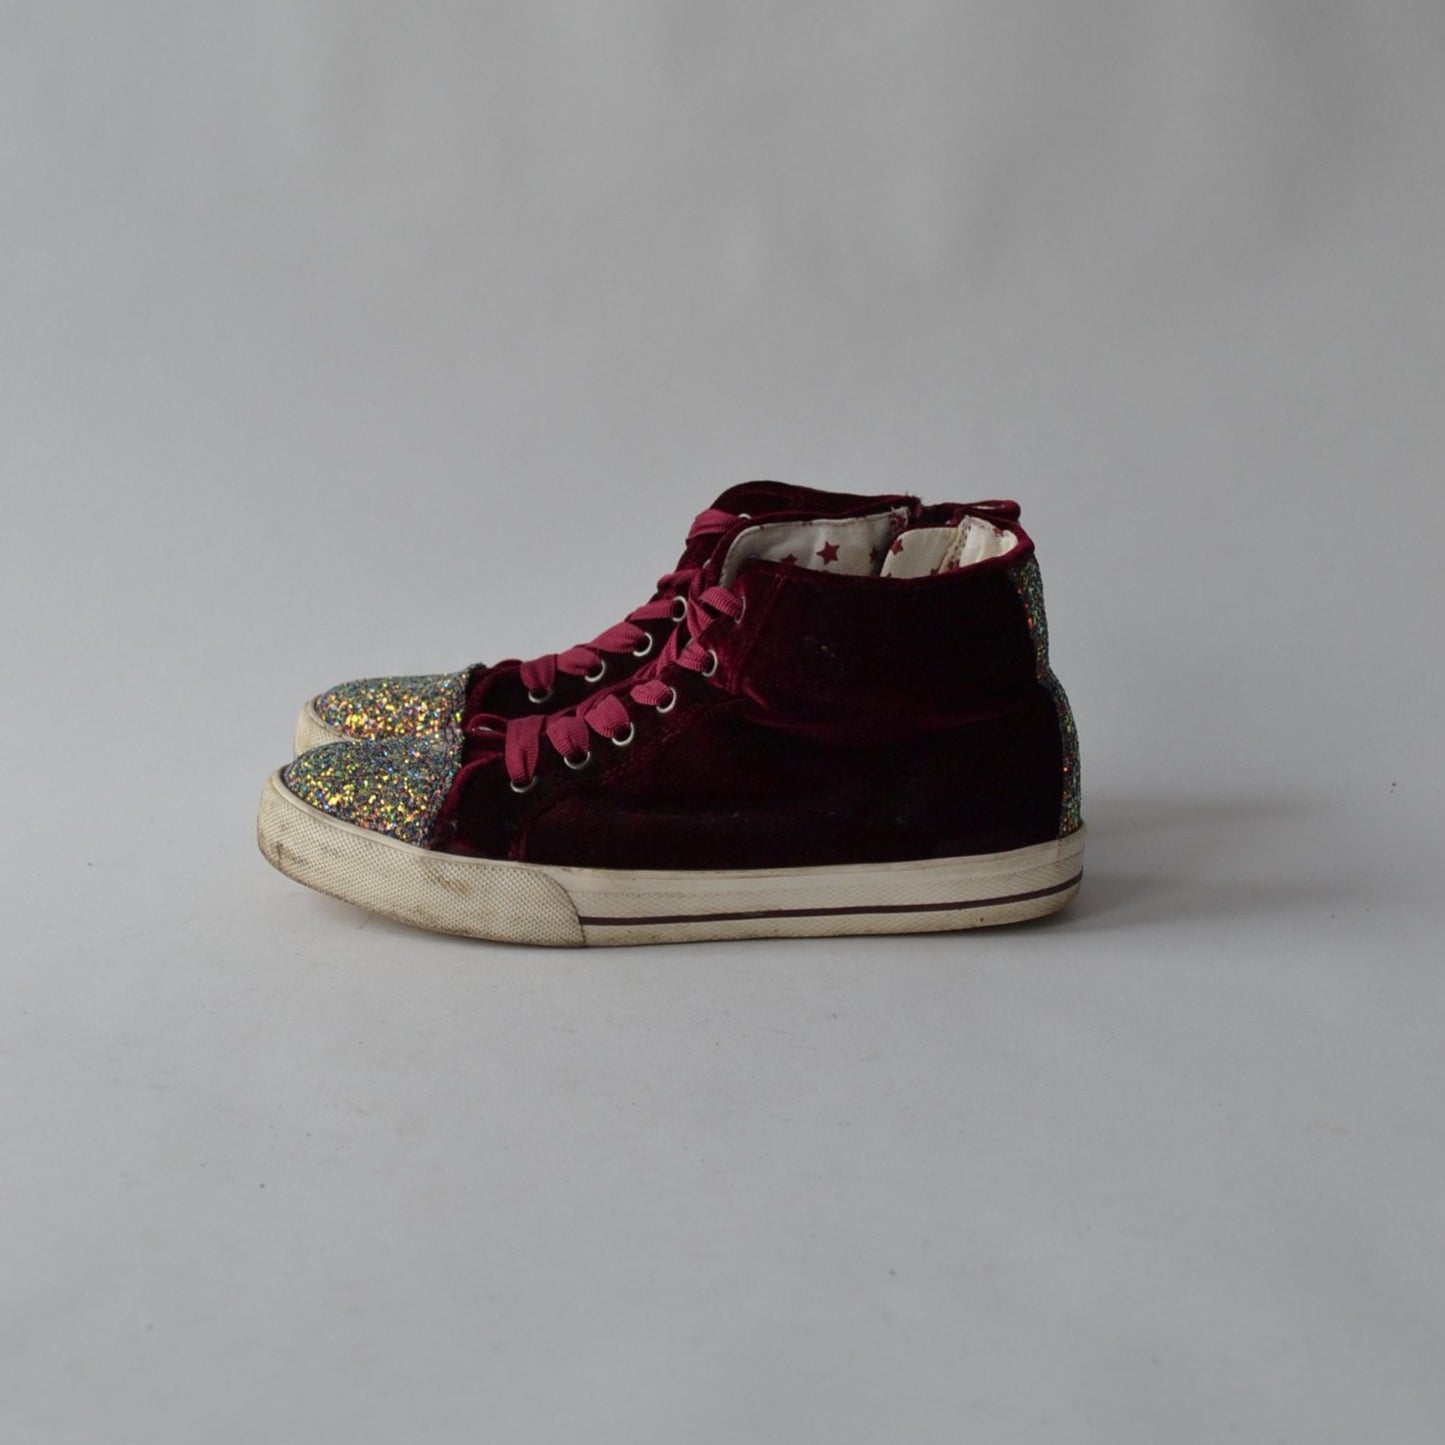 Trainers - M&S Sparkly Burgundy - Shoe Size 5